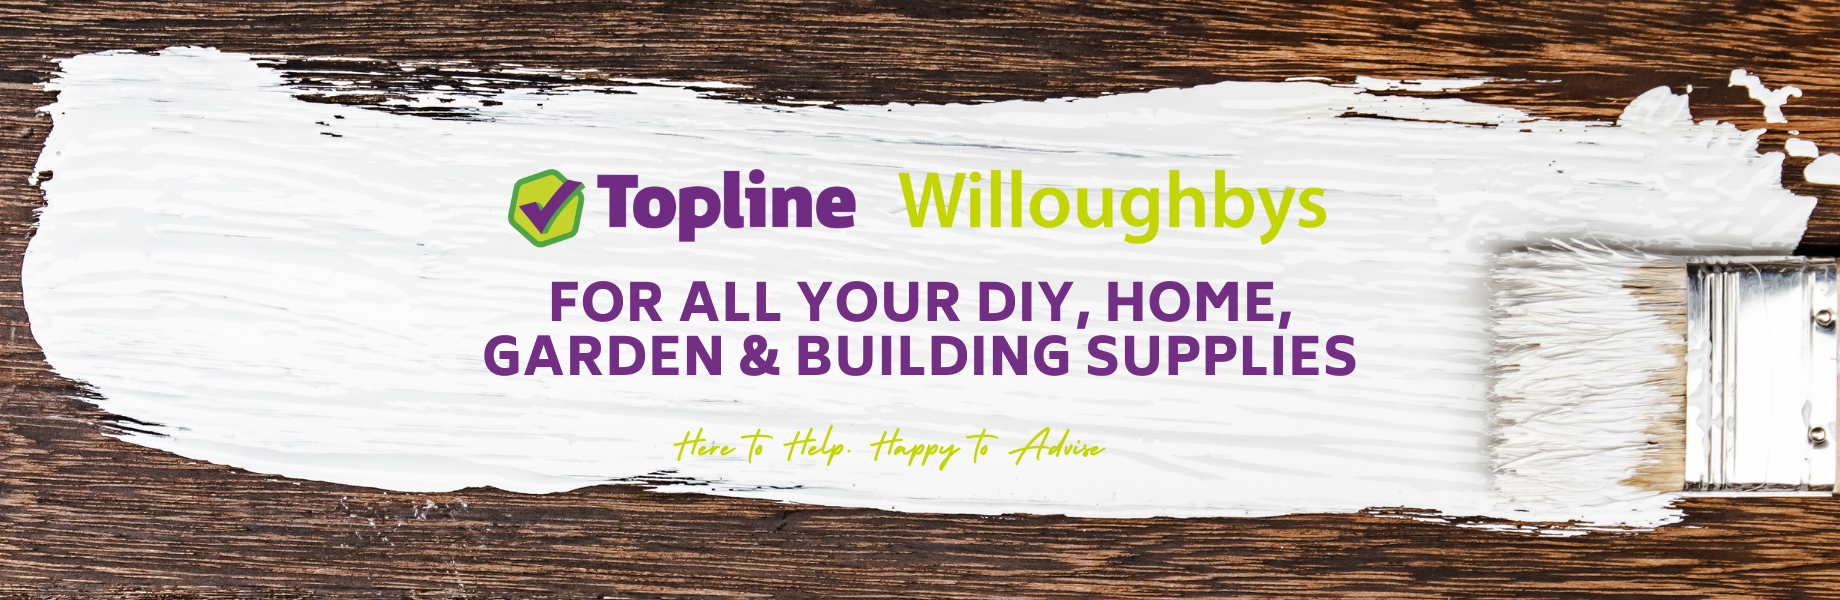 Topline Willoughbys For all your DIY and Building Supplies Needs